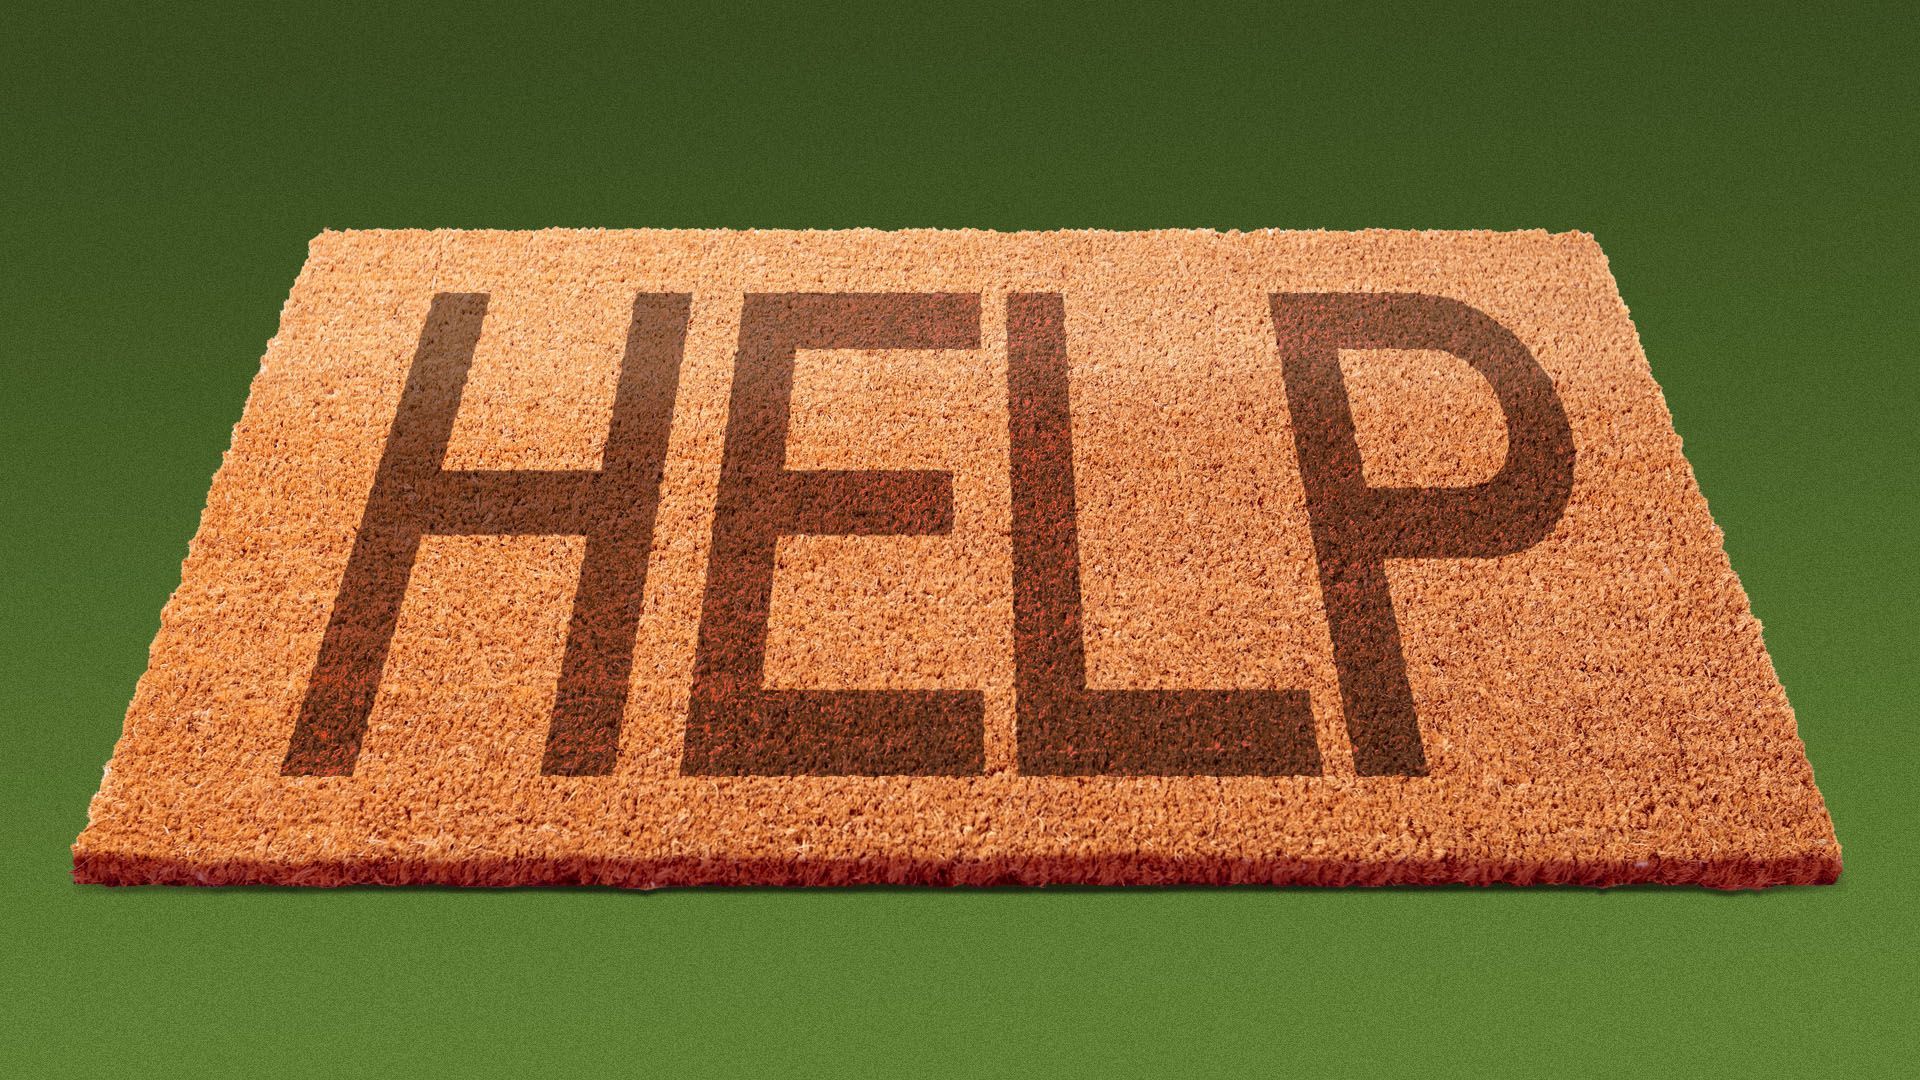 Illustration of a welcome mat that reads "help"